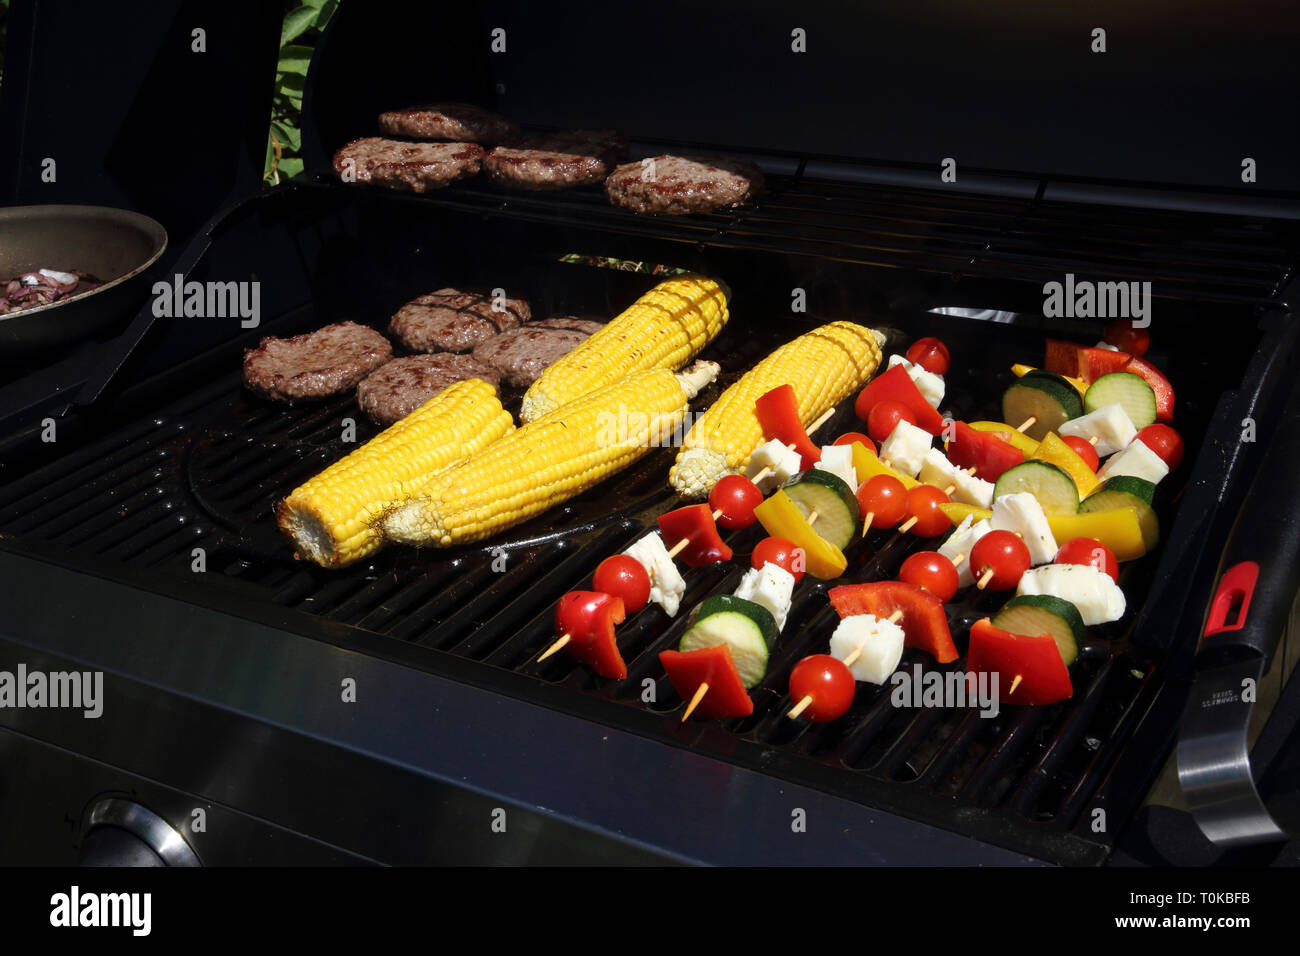 Cooking Kebabs, Corn on the Cob and Burgers on Barbeque in Garden Gillingham Dorset England Stock Photo